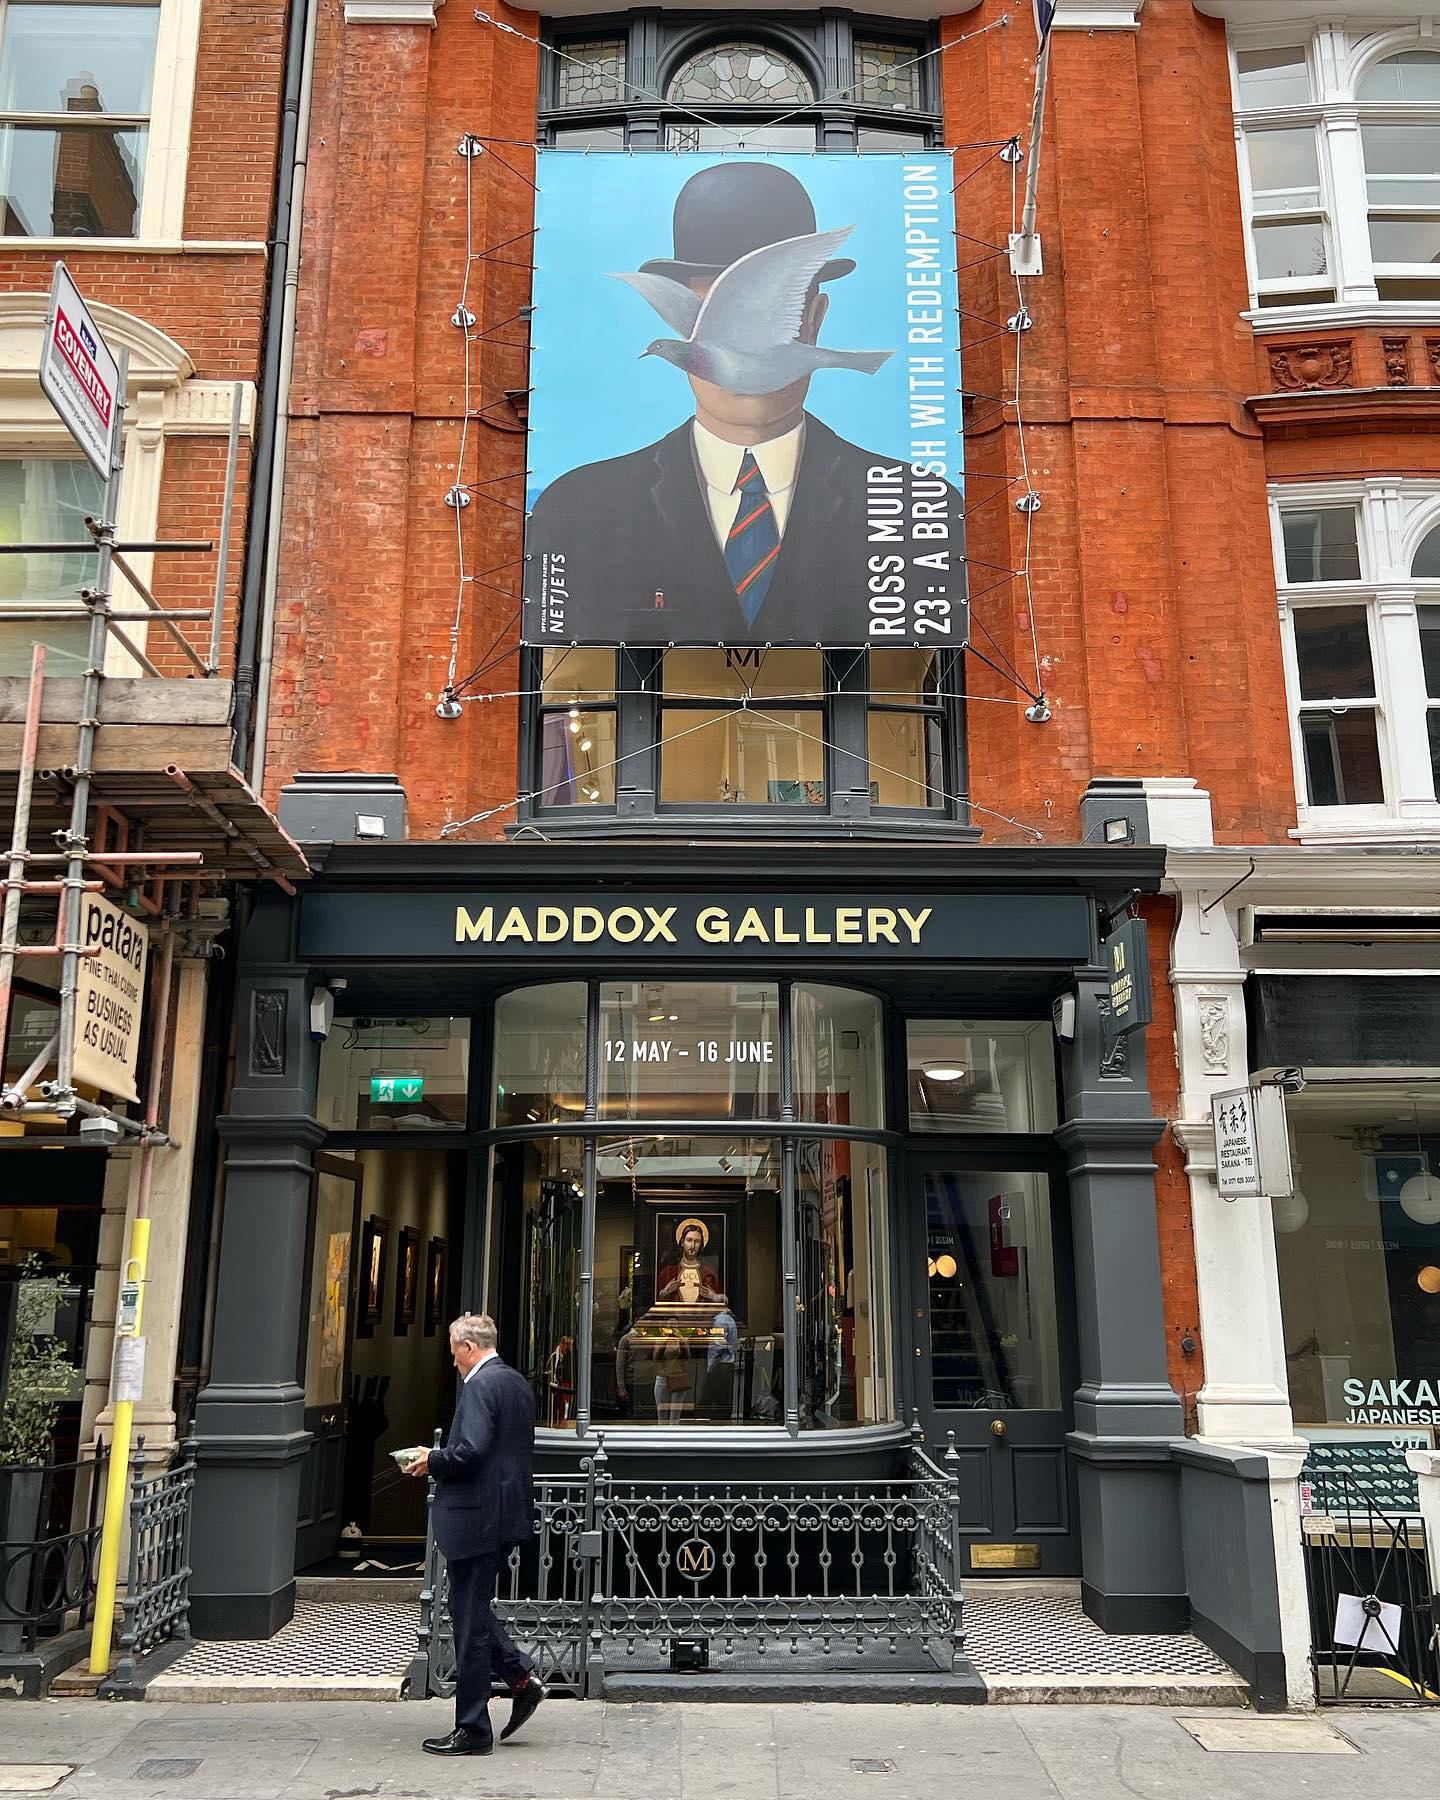 All Things England - Maddox Gallery #maddoxgallery is now well known for its jaw dropping displays w